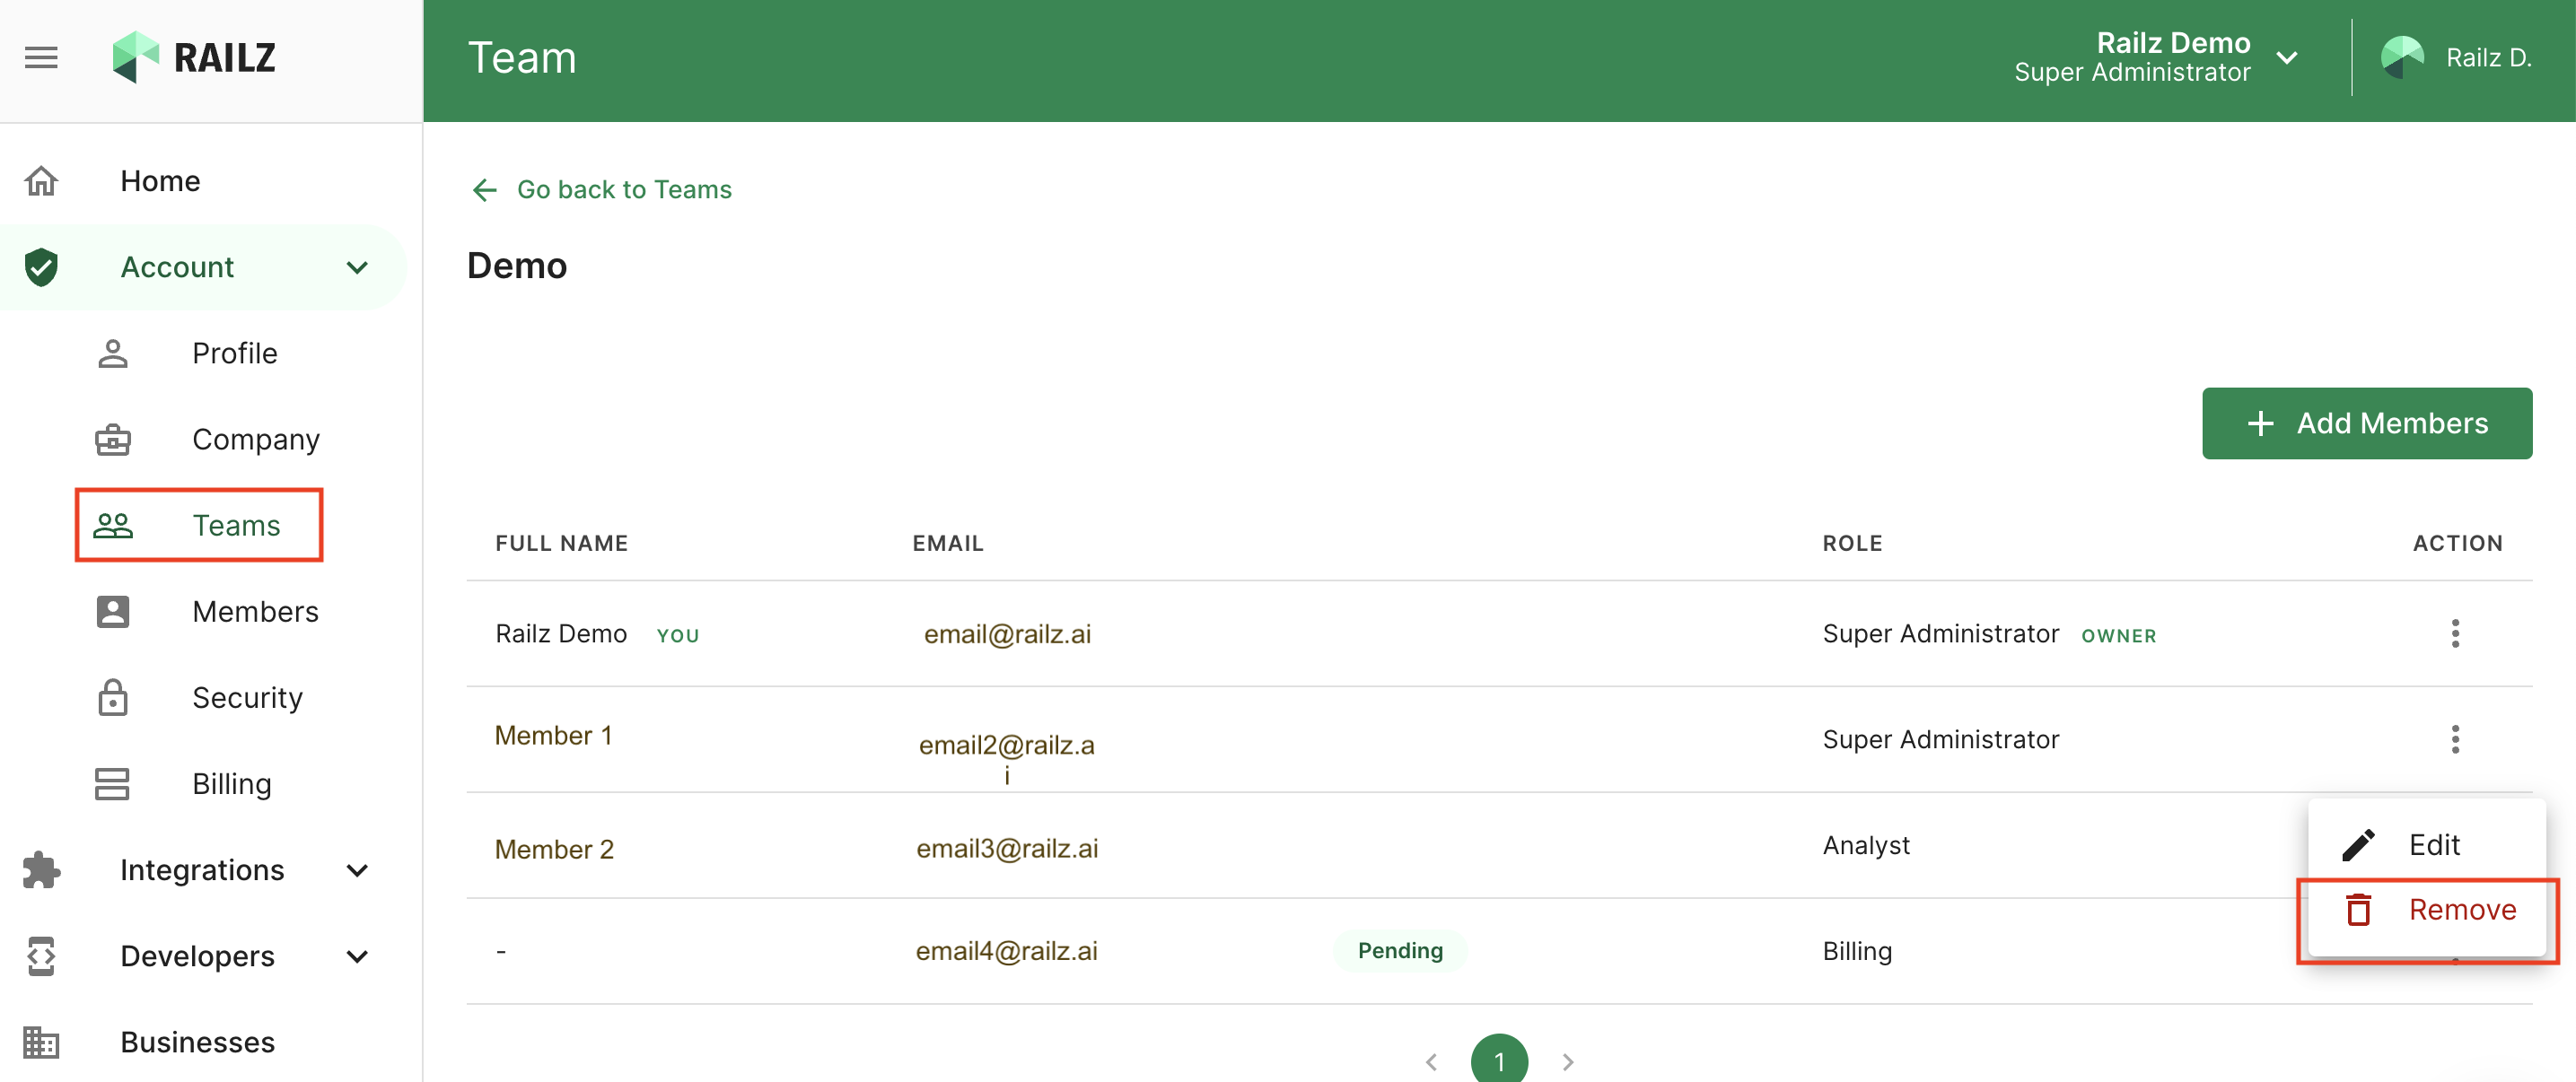 Manage team page in Railz Dashboard. Click to Expand.